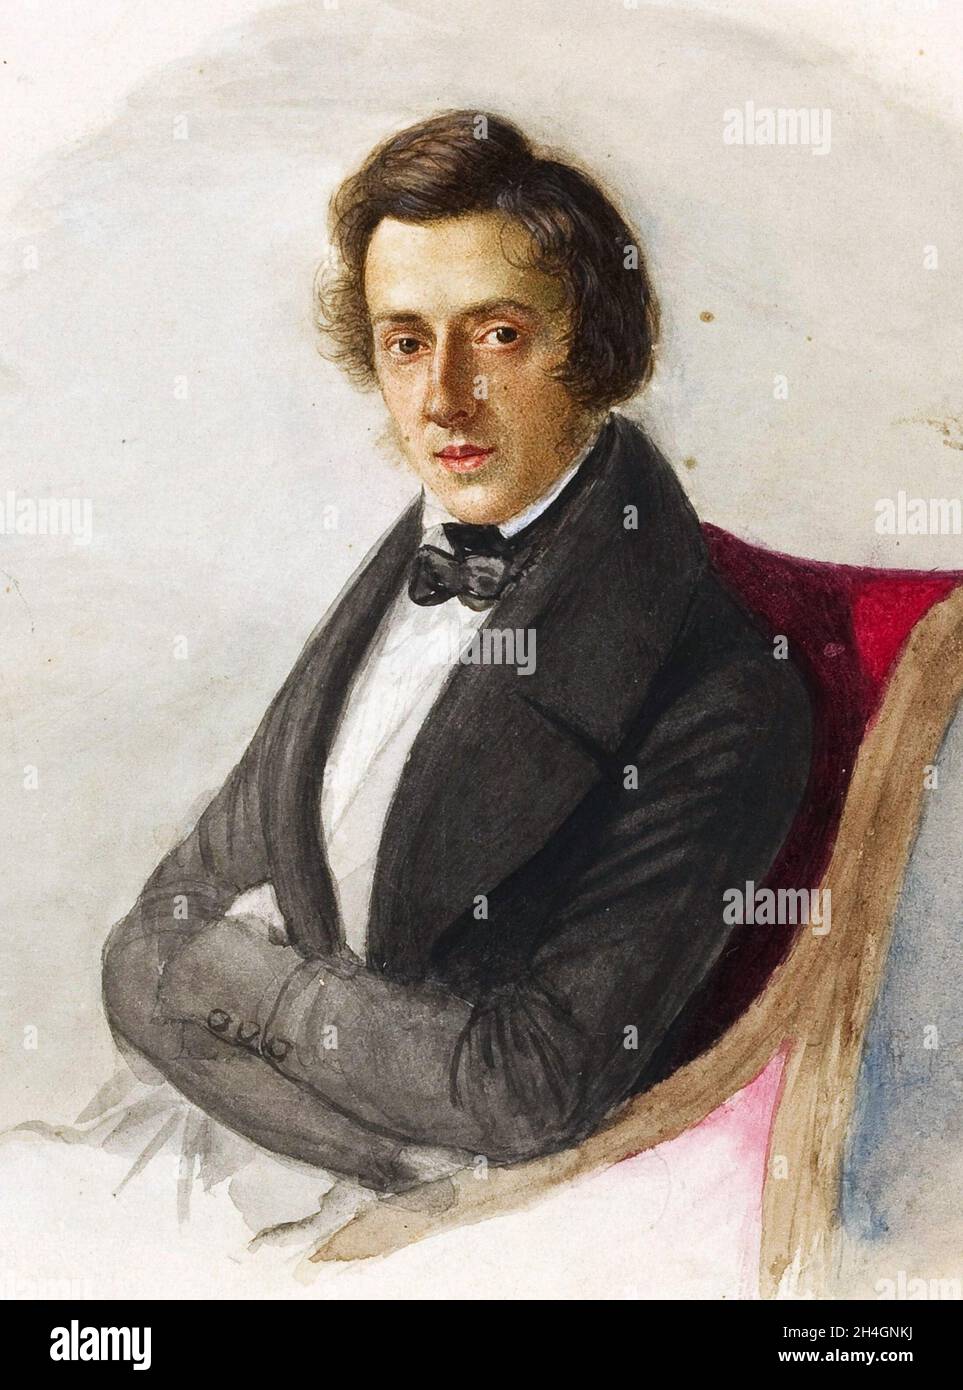 The Polish pianist and composer Frederic Chopin Stock Photo